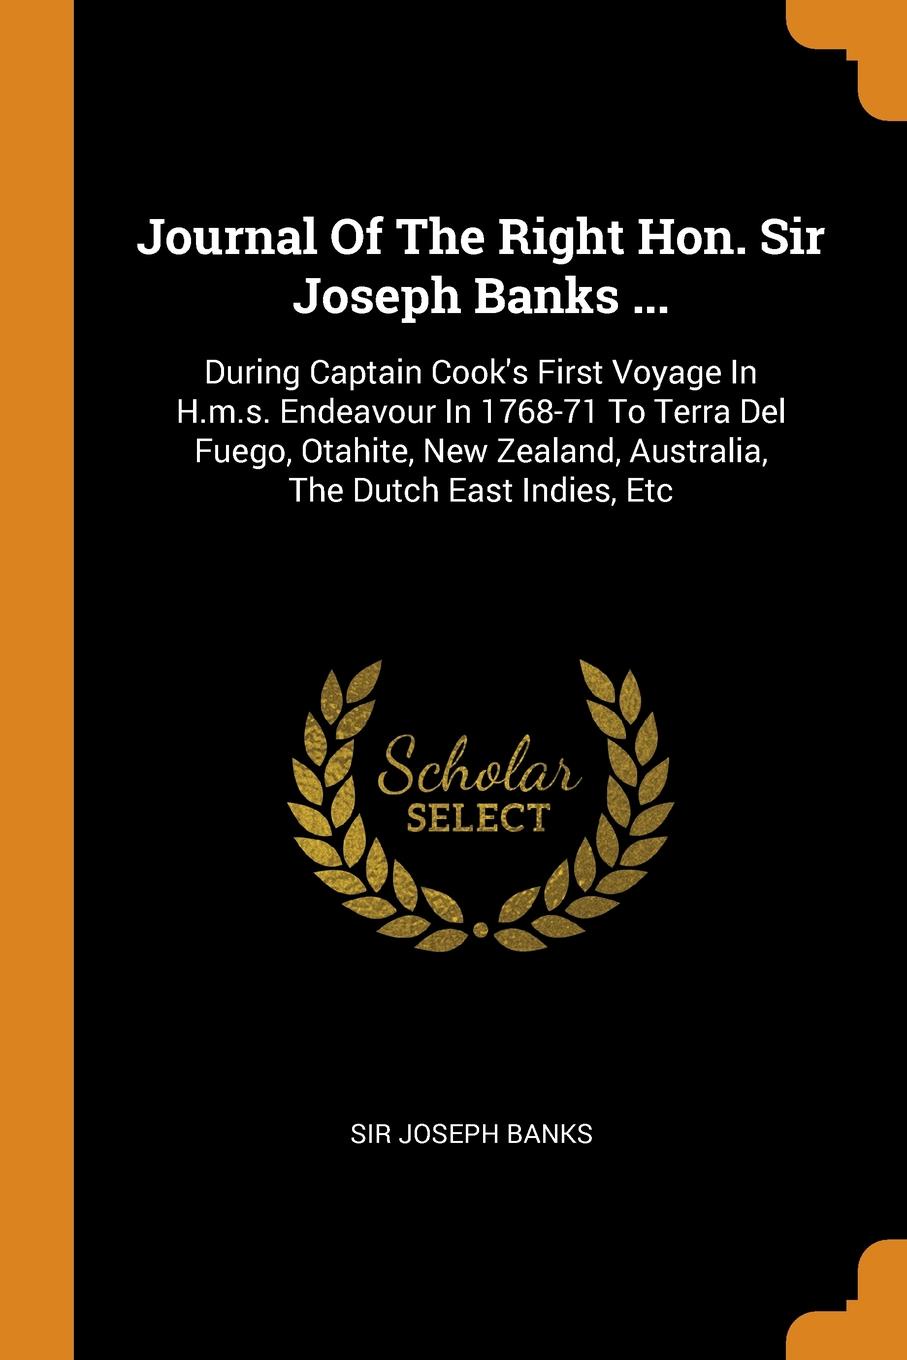 Journal Of The Right Hon. Sir Joseph Banks ... During Captain Cook.s First Voyage In H.m.s. Endeavour In 1768-71 To Terra Del Fuego, Otahite, New Zealand, Australia, The Dutch East Indies, Etc